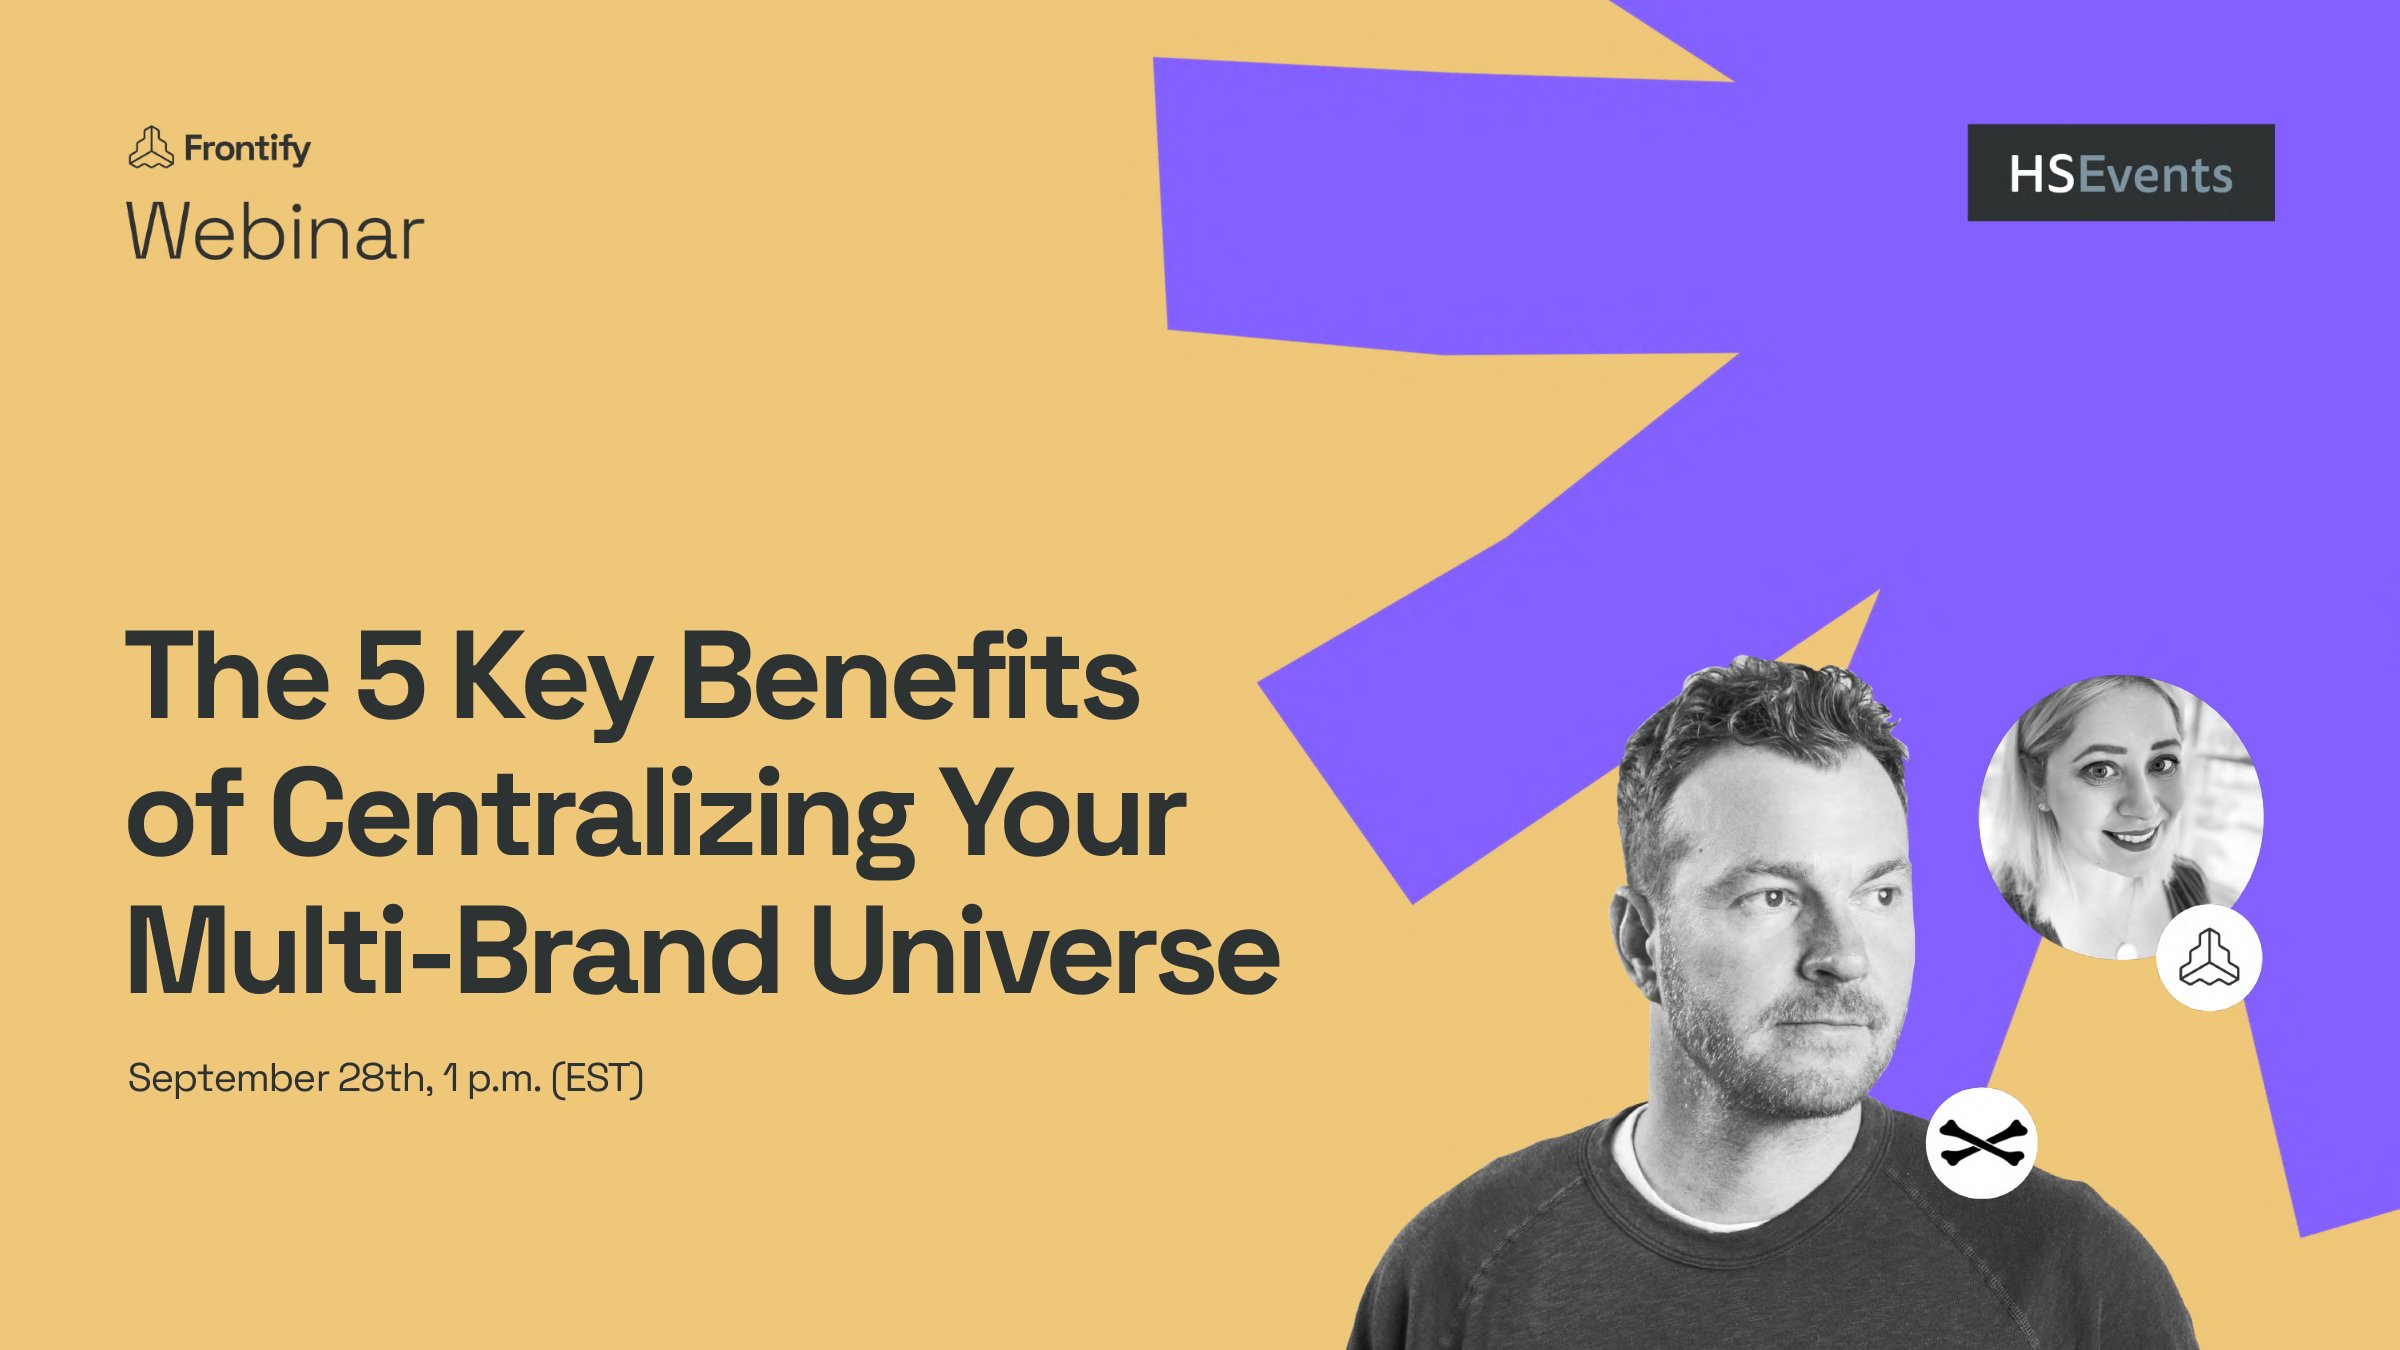 The 5 Key Benefits of Centralizing Your Multi-Brand Universe